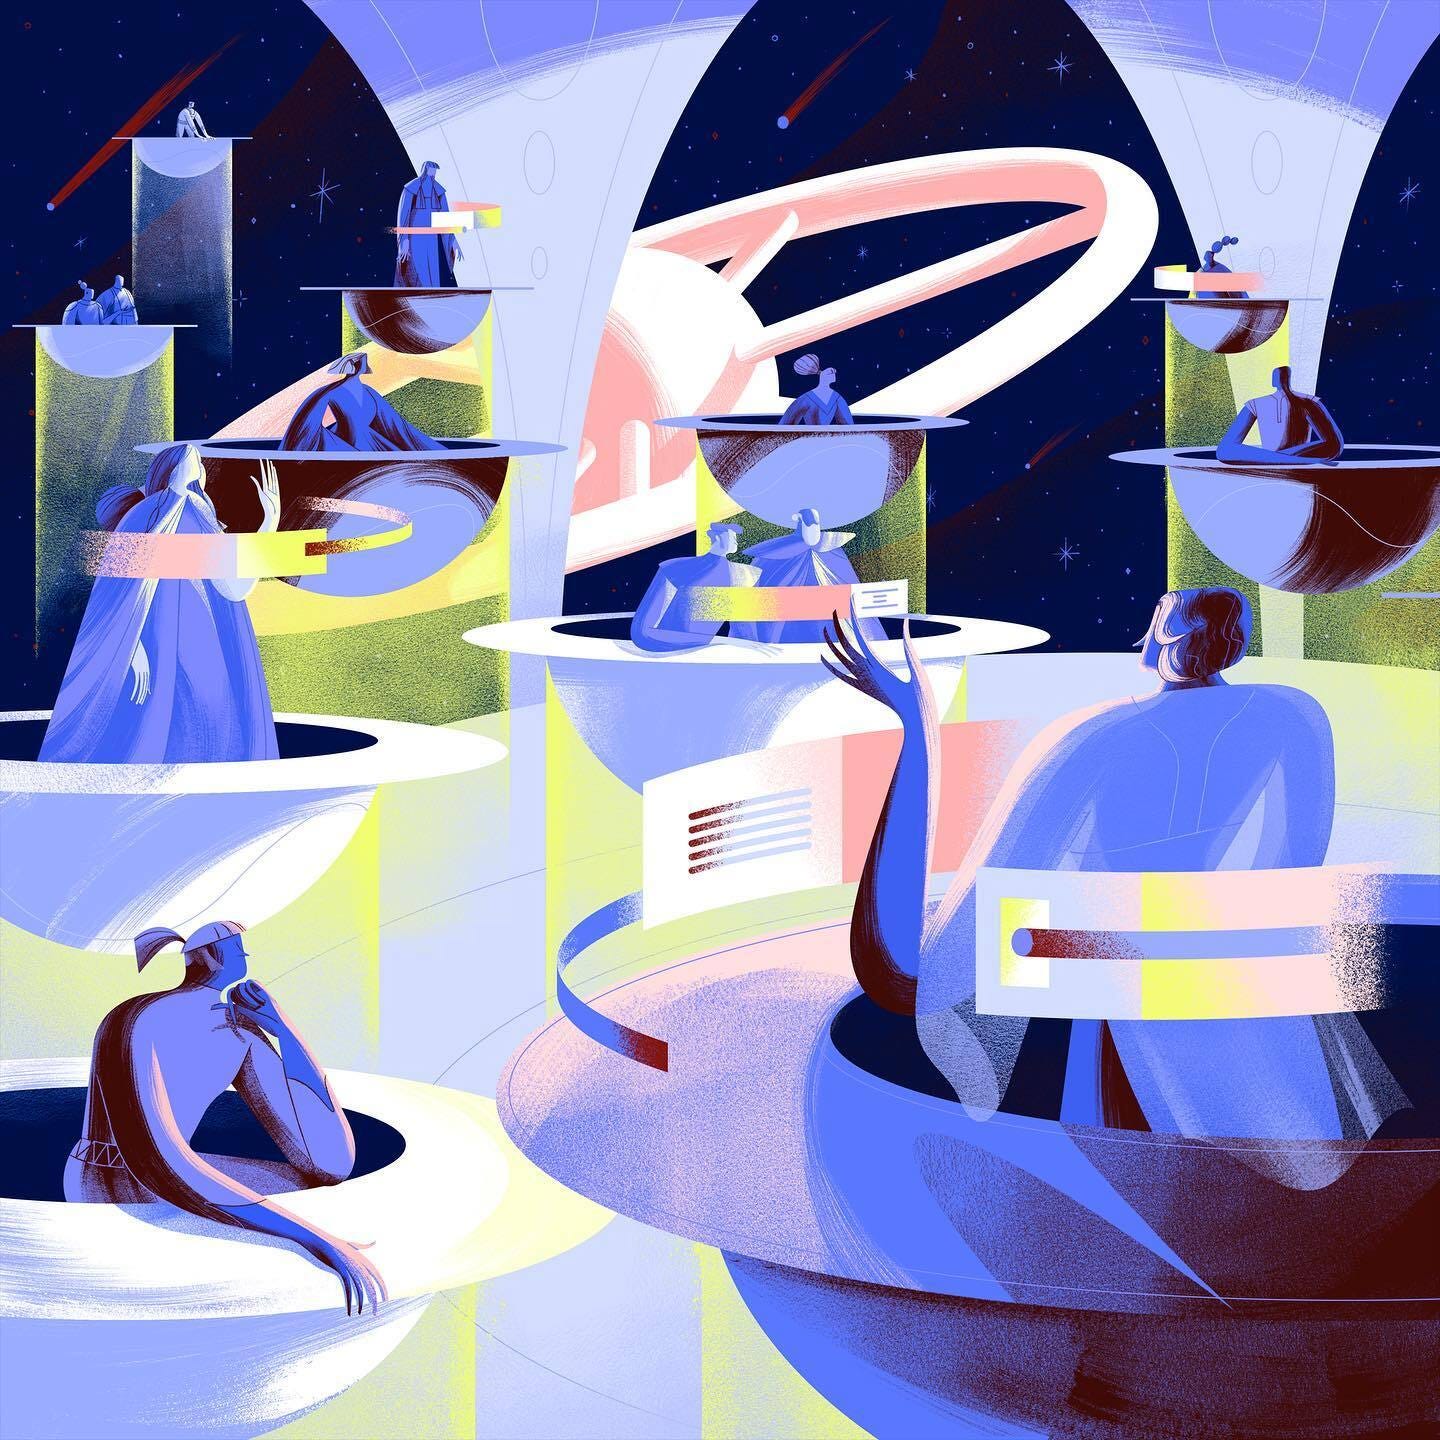 A futuristic sci-fi scene in blues, yellows and purples, depicting a meeting between different figures who float individually in hovering disk-shaped spaceships.